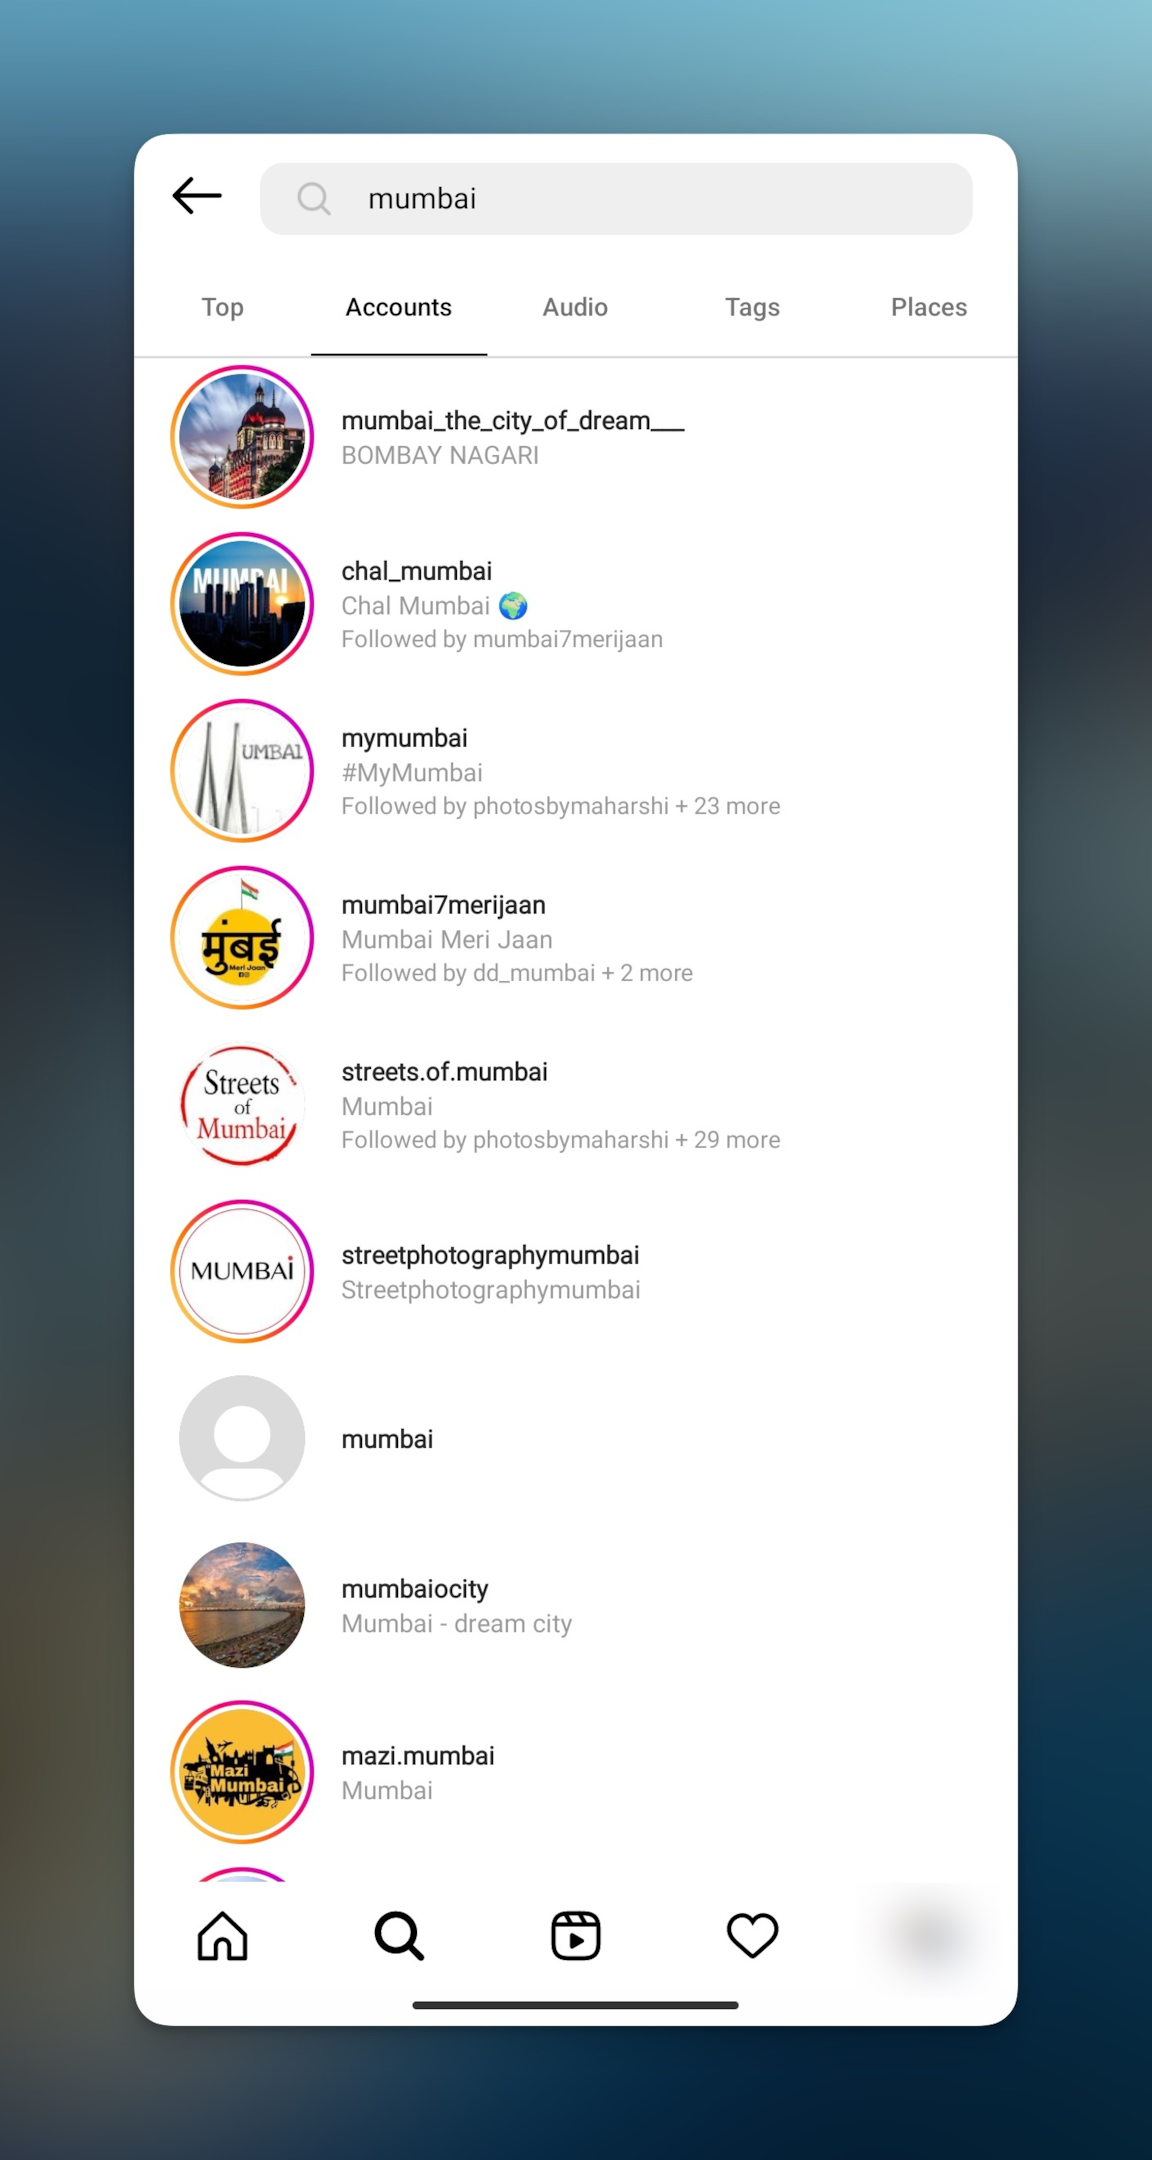 Remote.tools shows a list of Instagram accounts in Instagram search